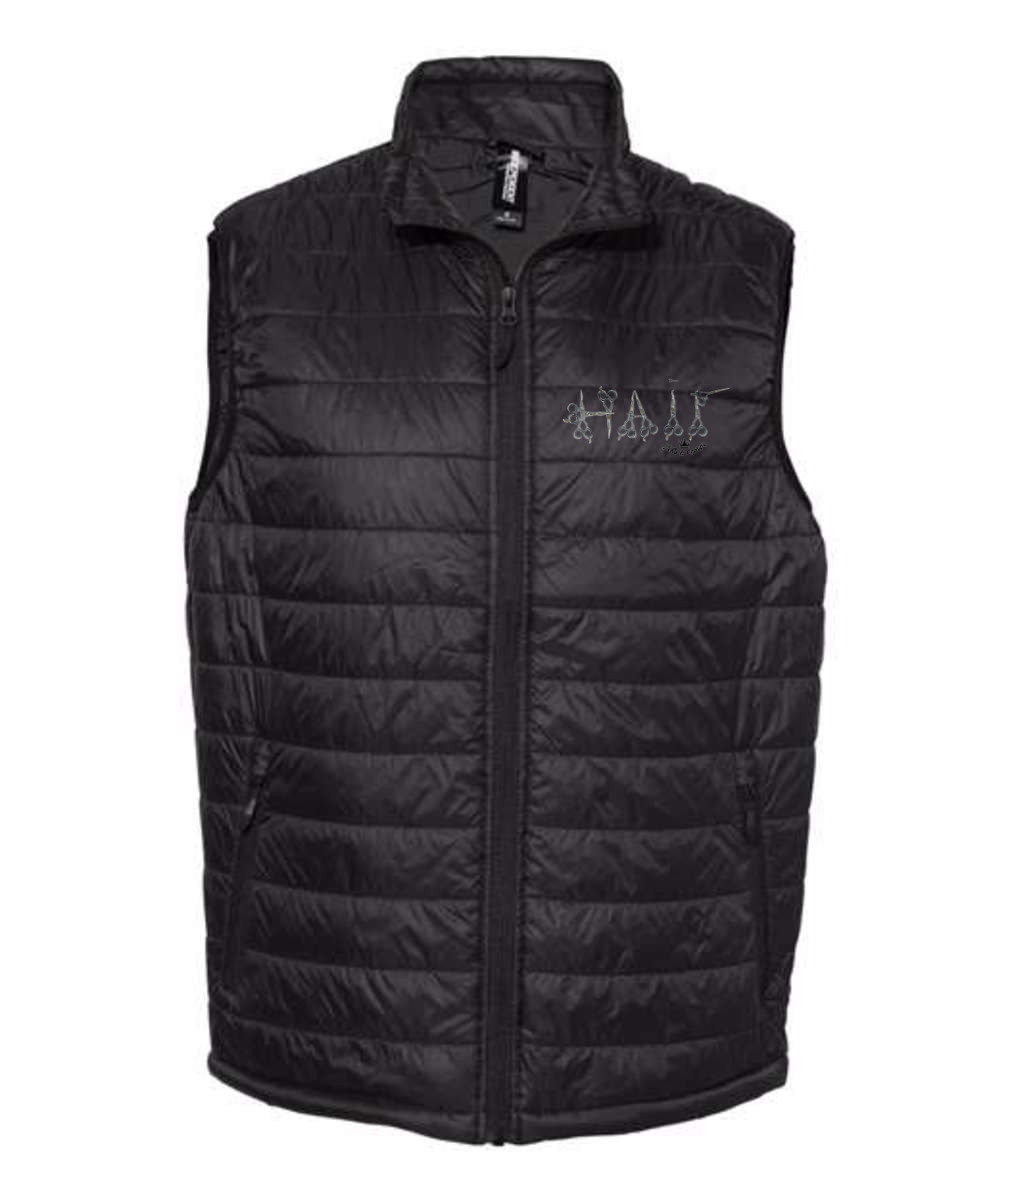 Hair print Independent Trading Co. - Puffer Vest Embroidered